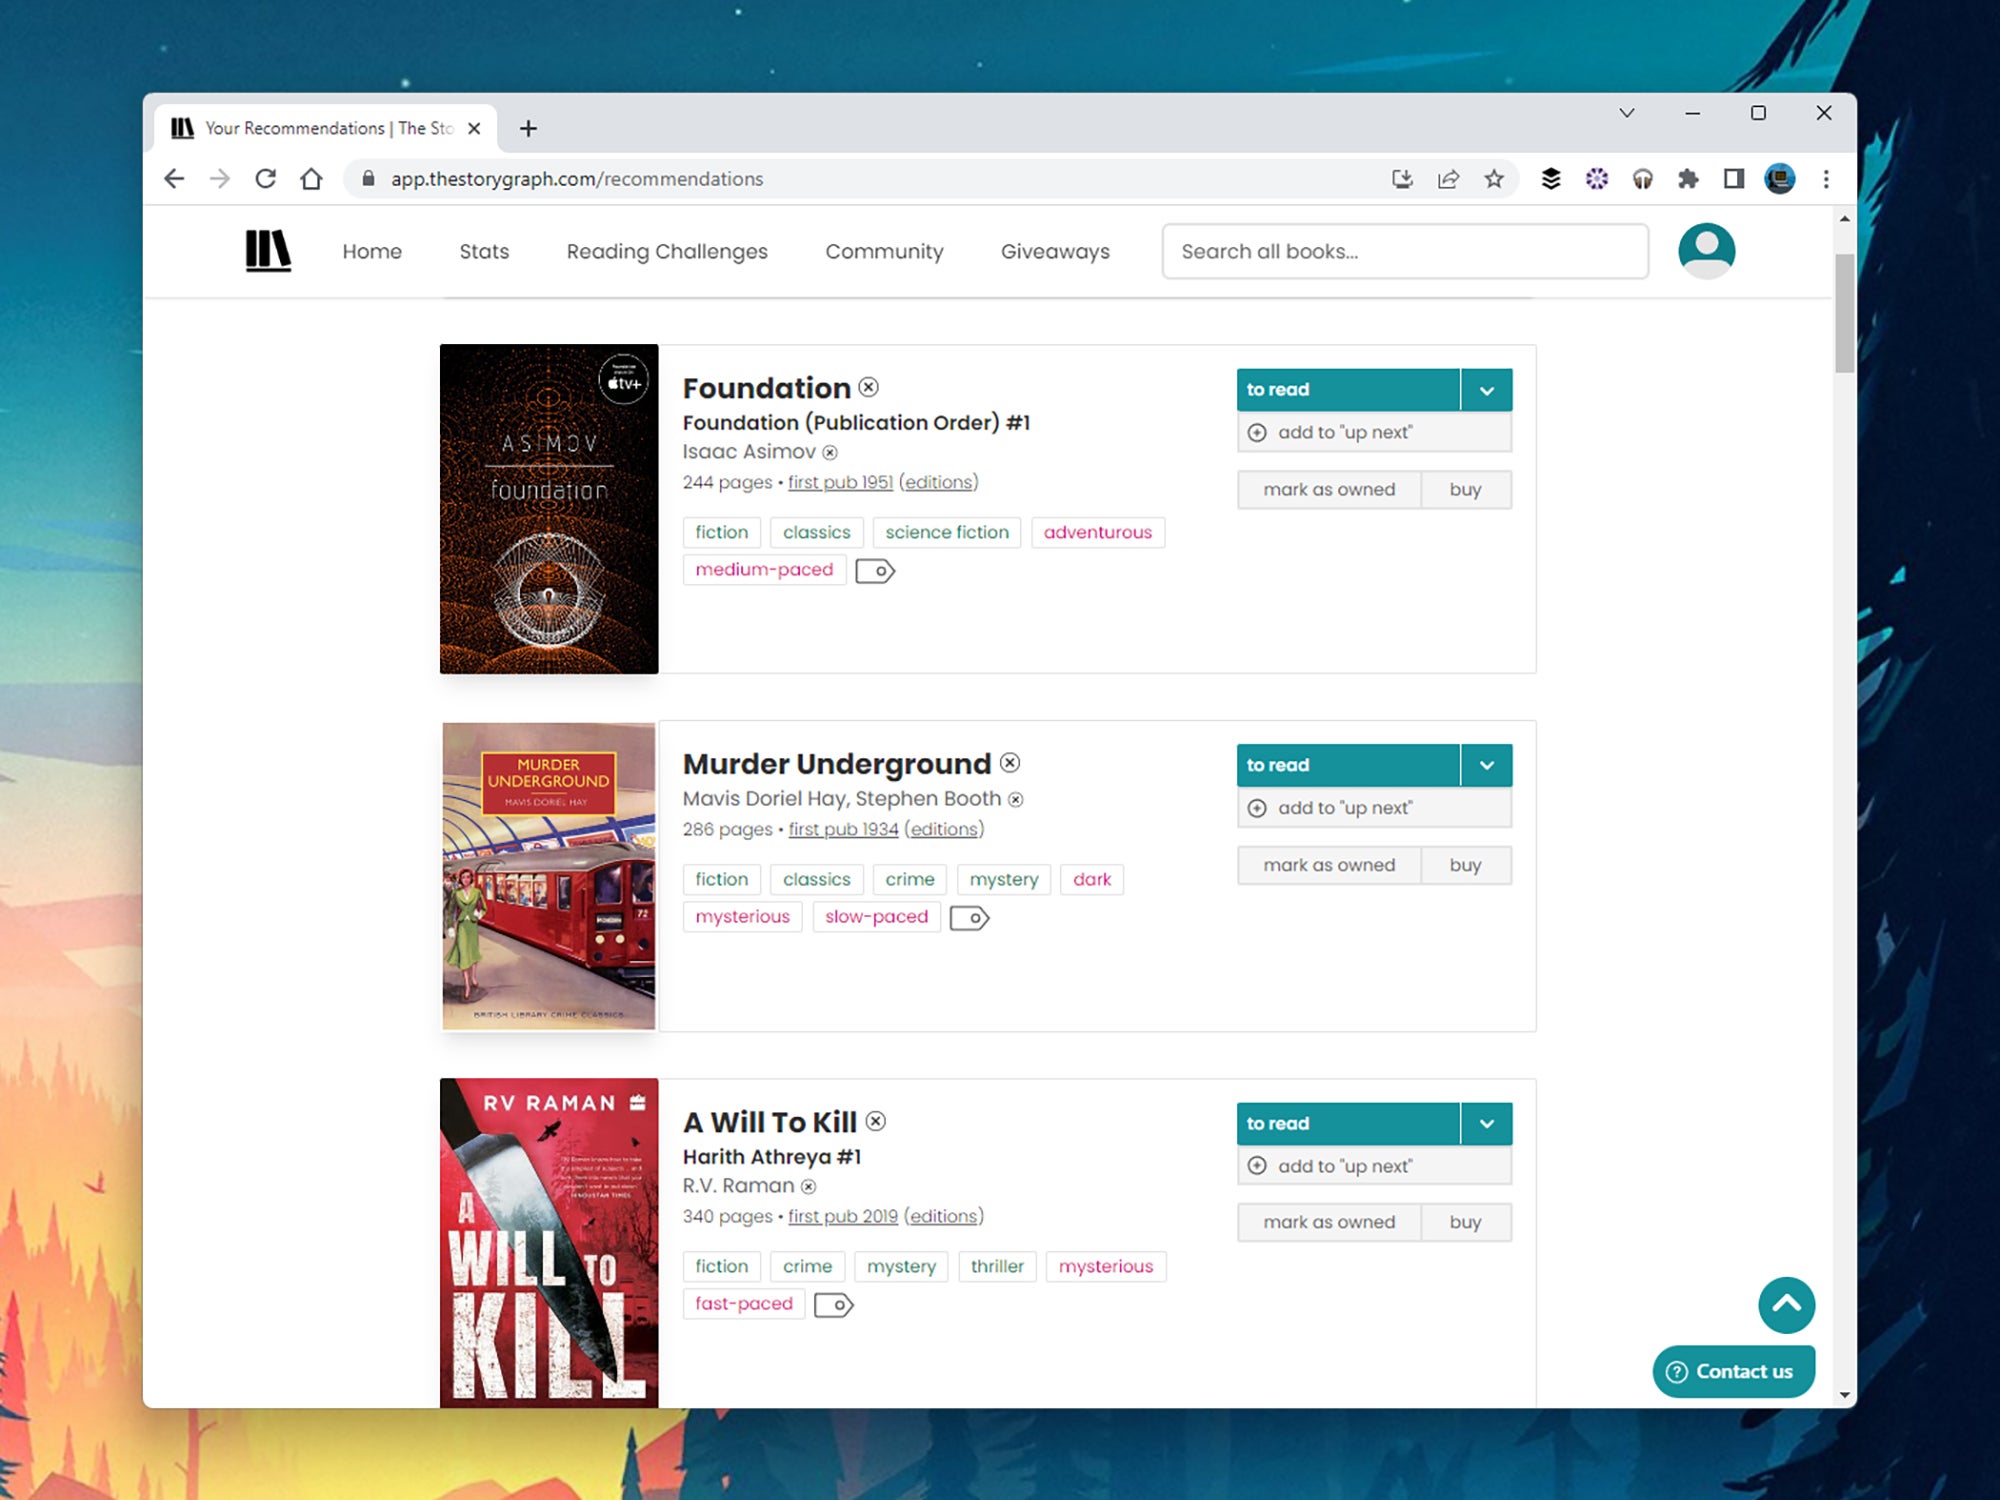 The book recommendations interface on StoryGraph.